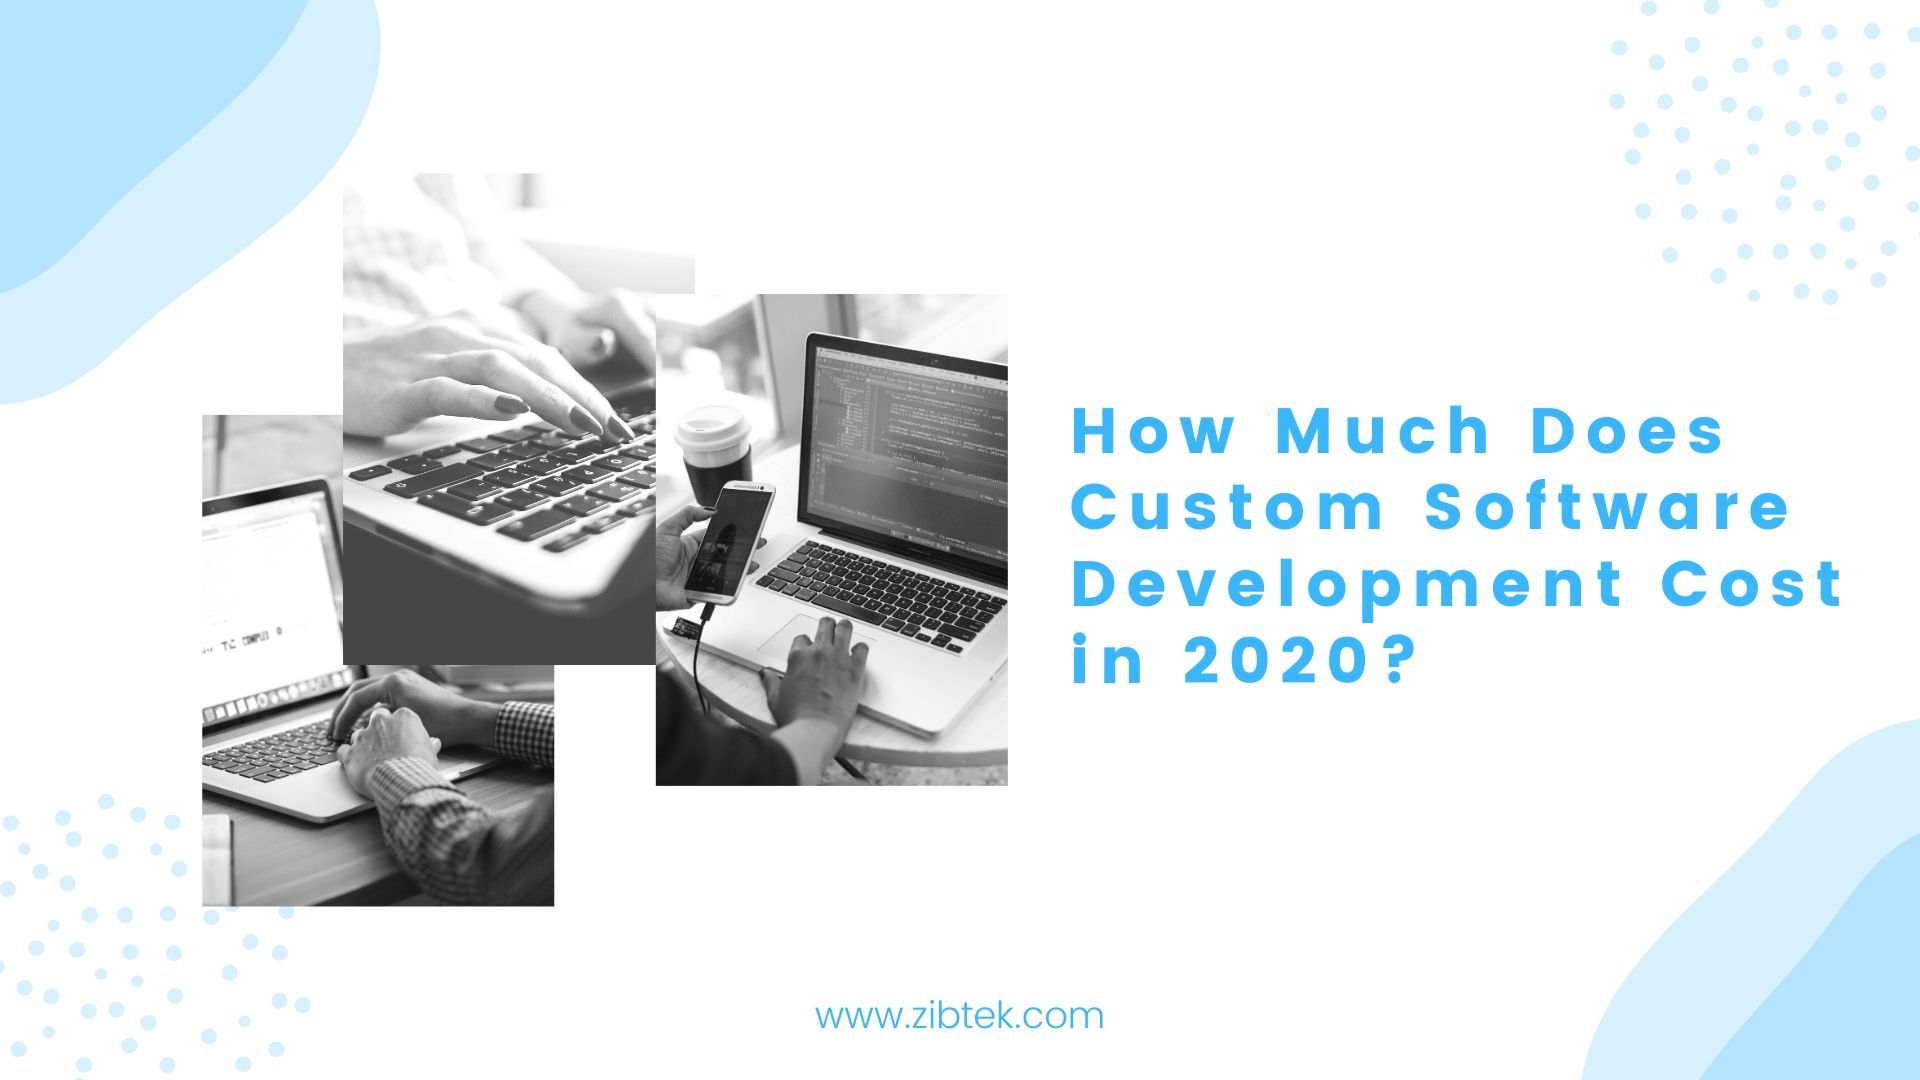 How Much Does Custom Software Development Cost in 2020?